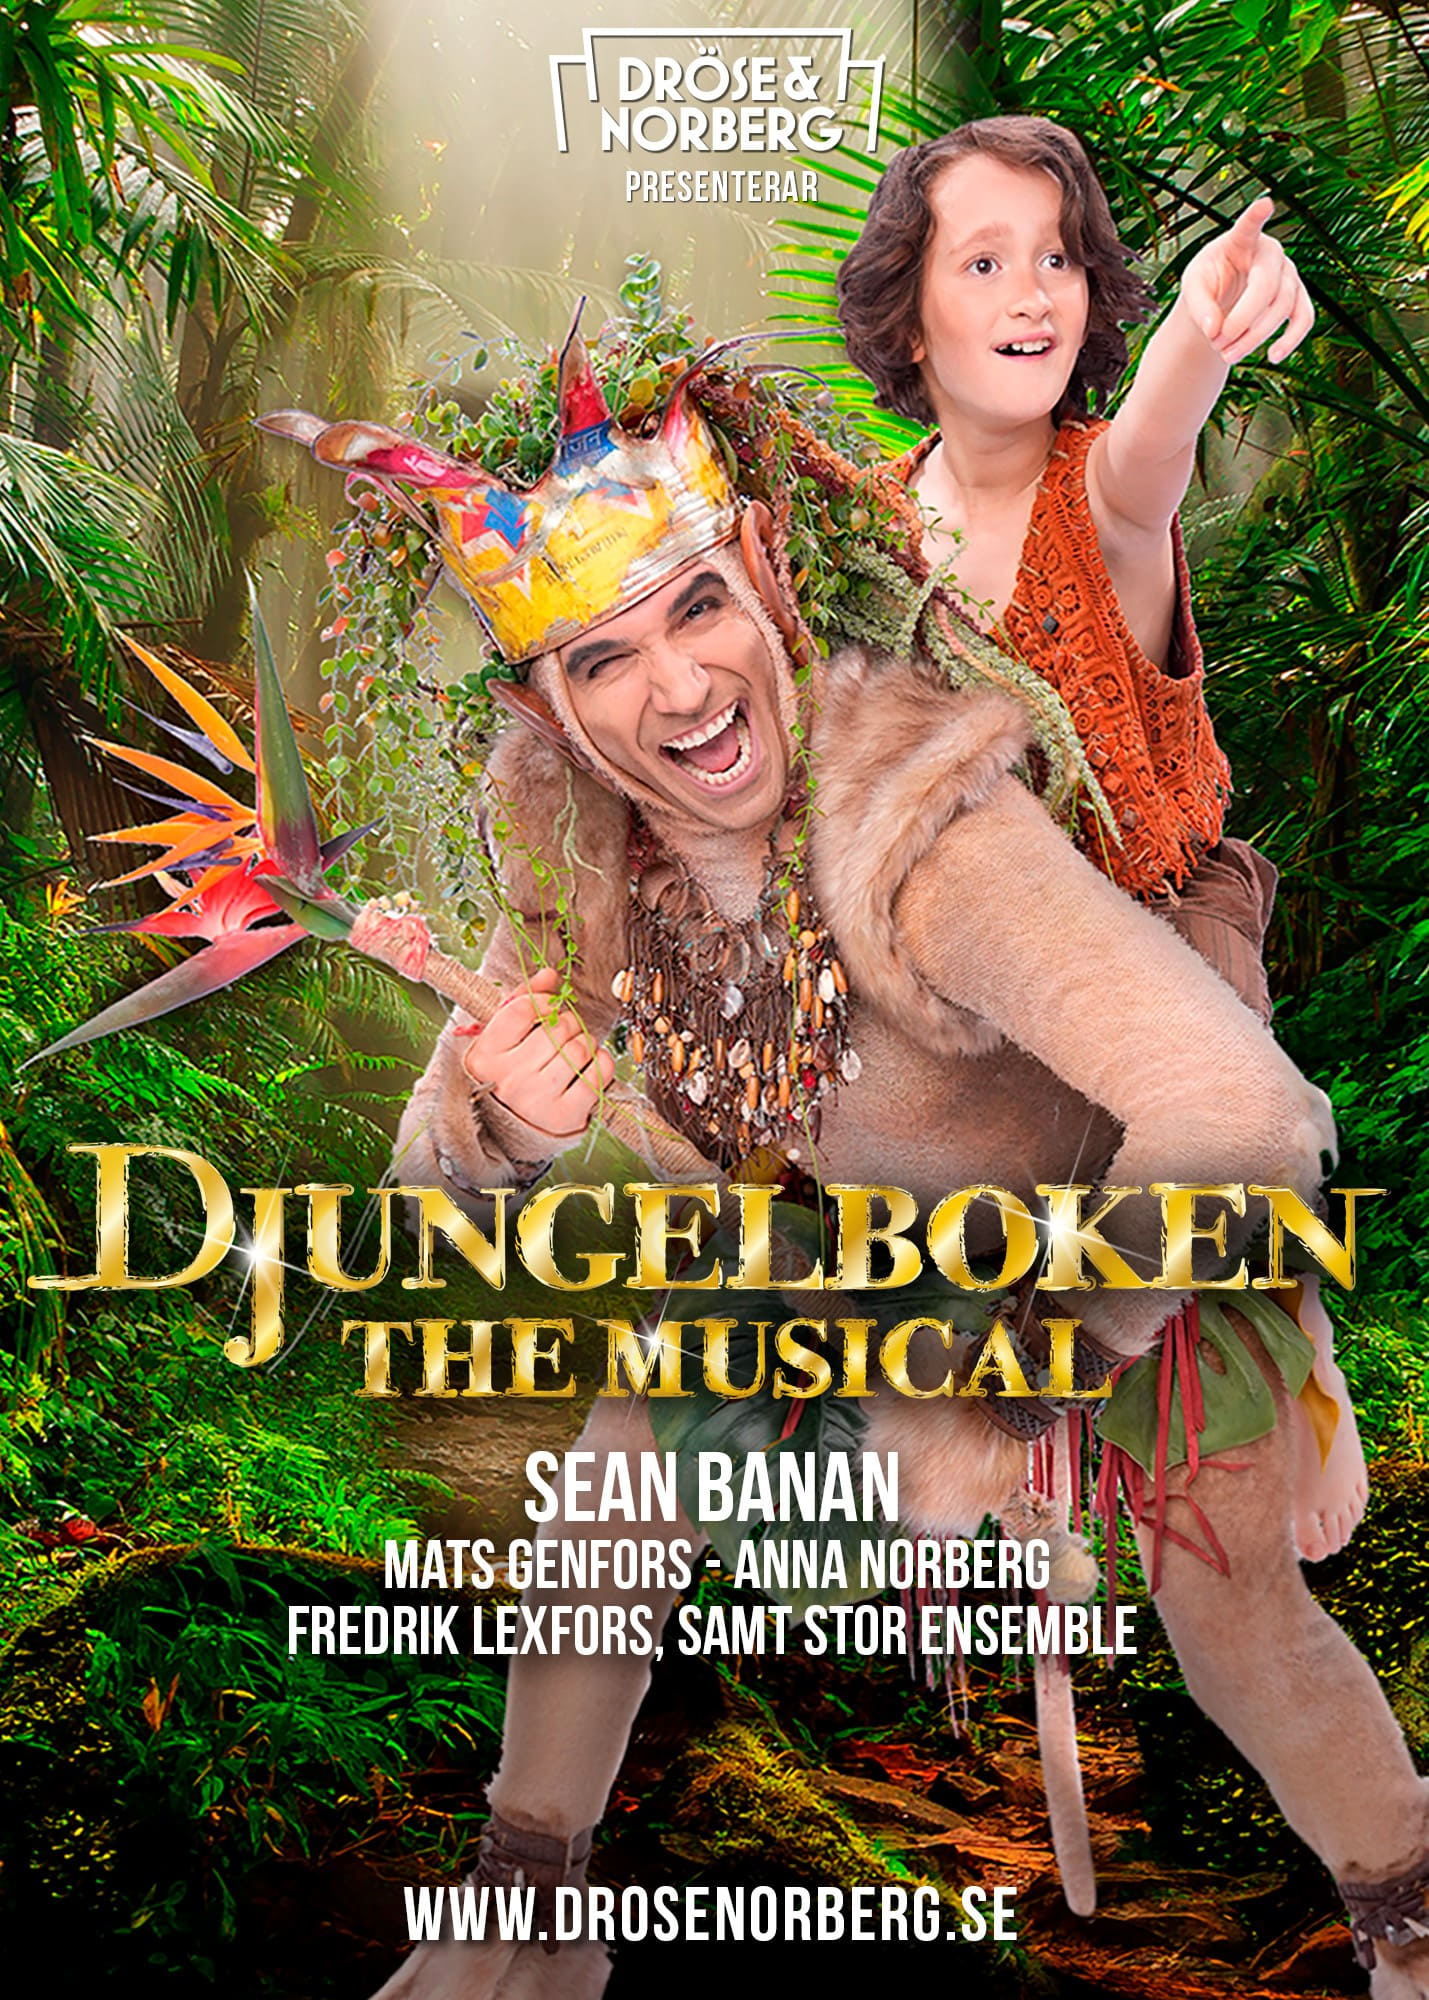 The Jungle Book - The Musical